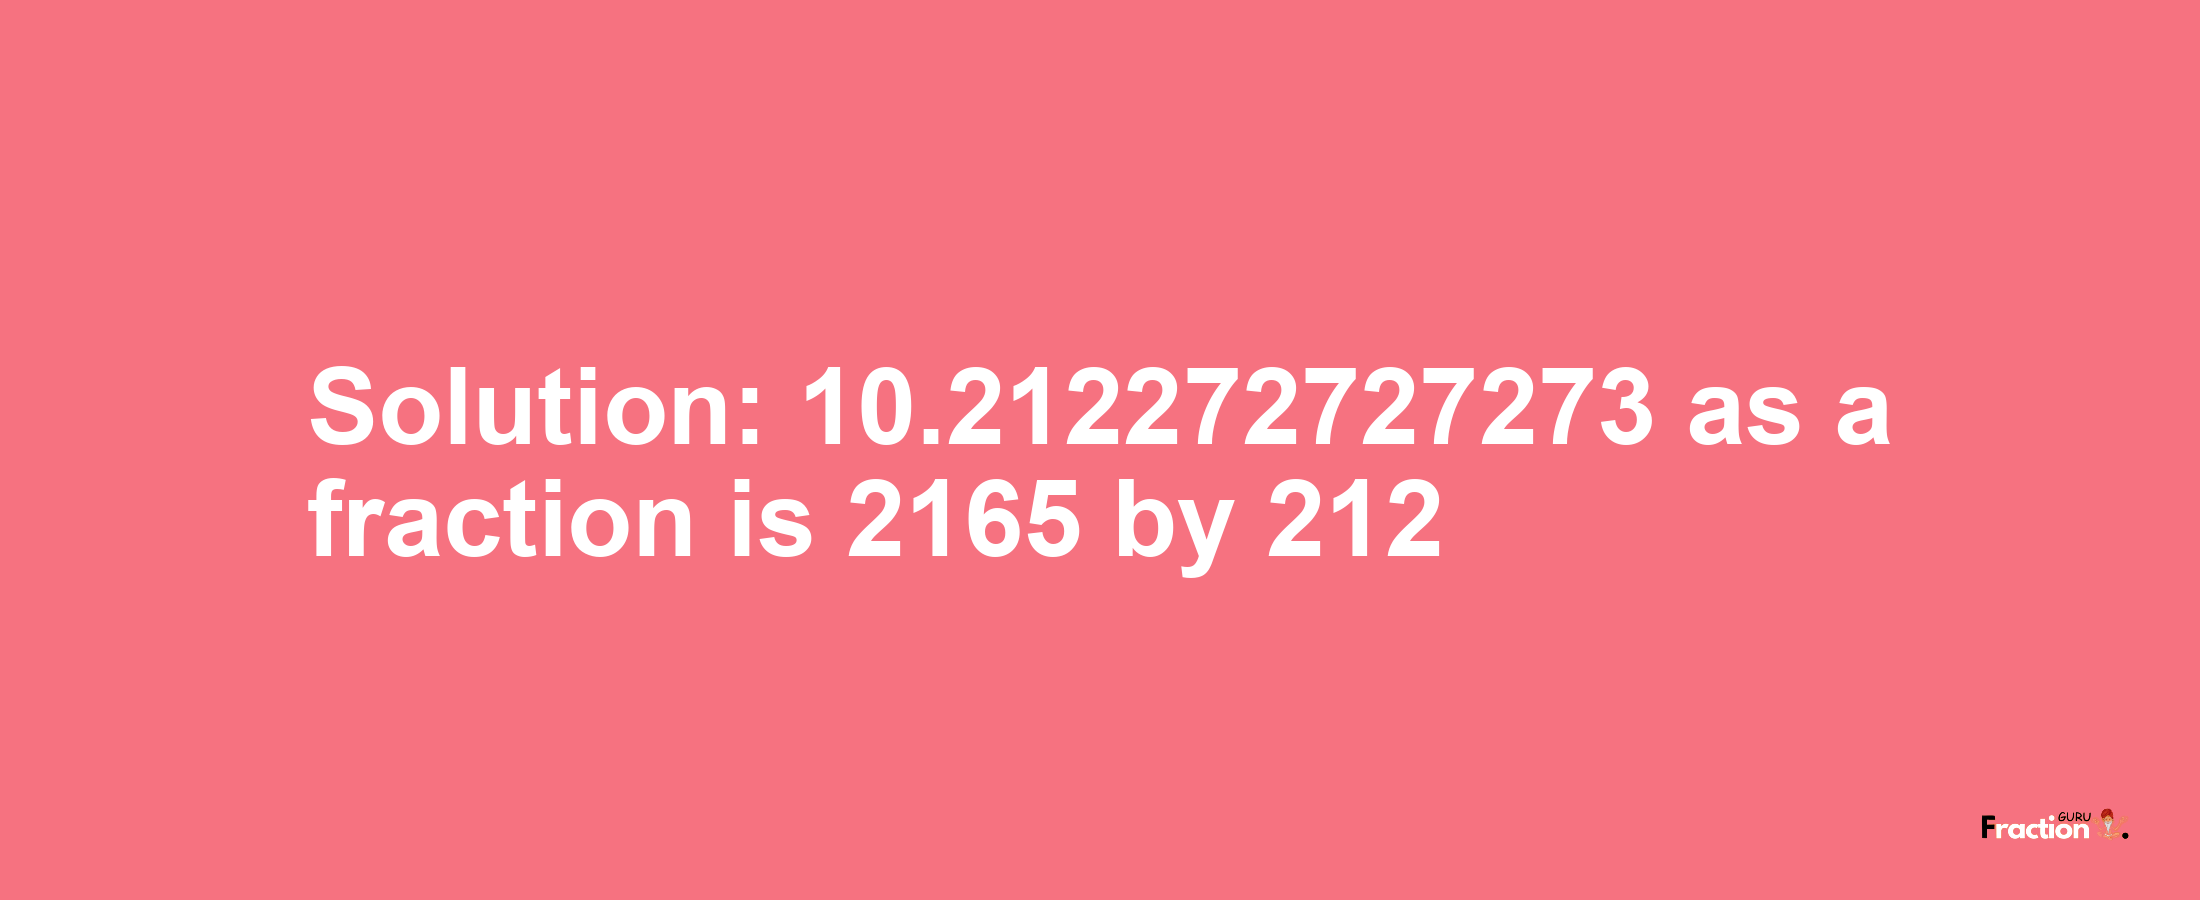 Solution:10.212272727273 as a fraction is 2165/212